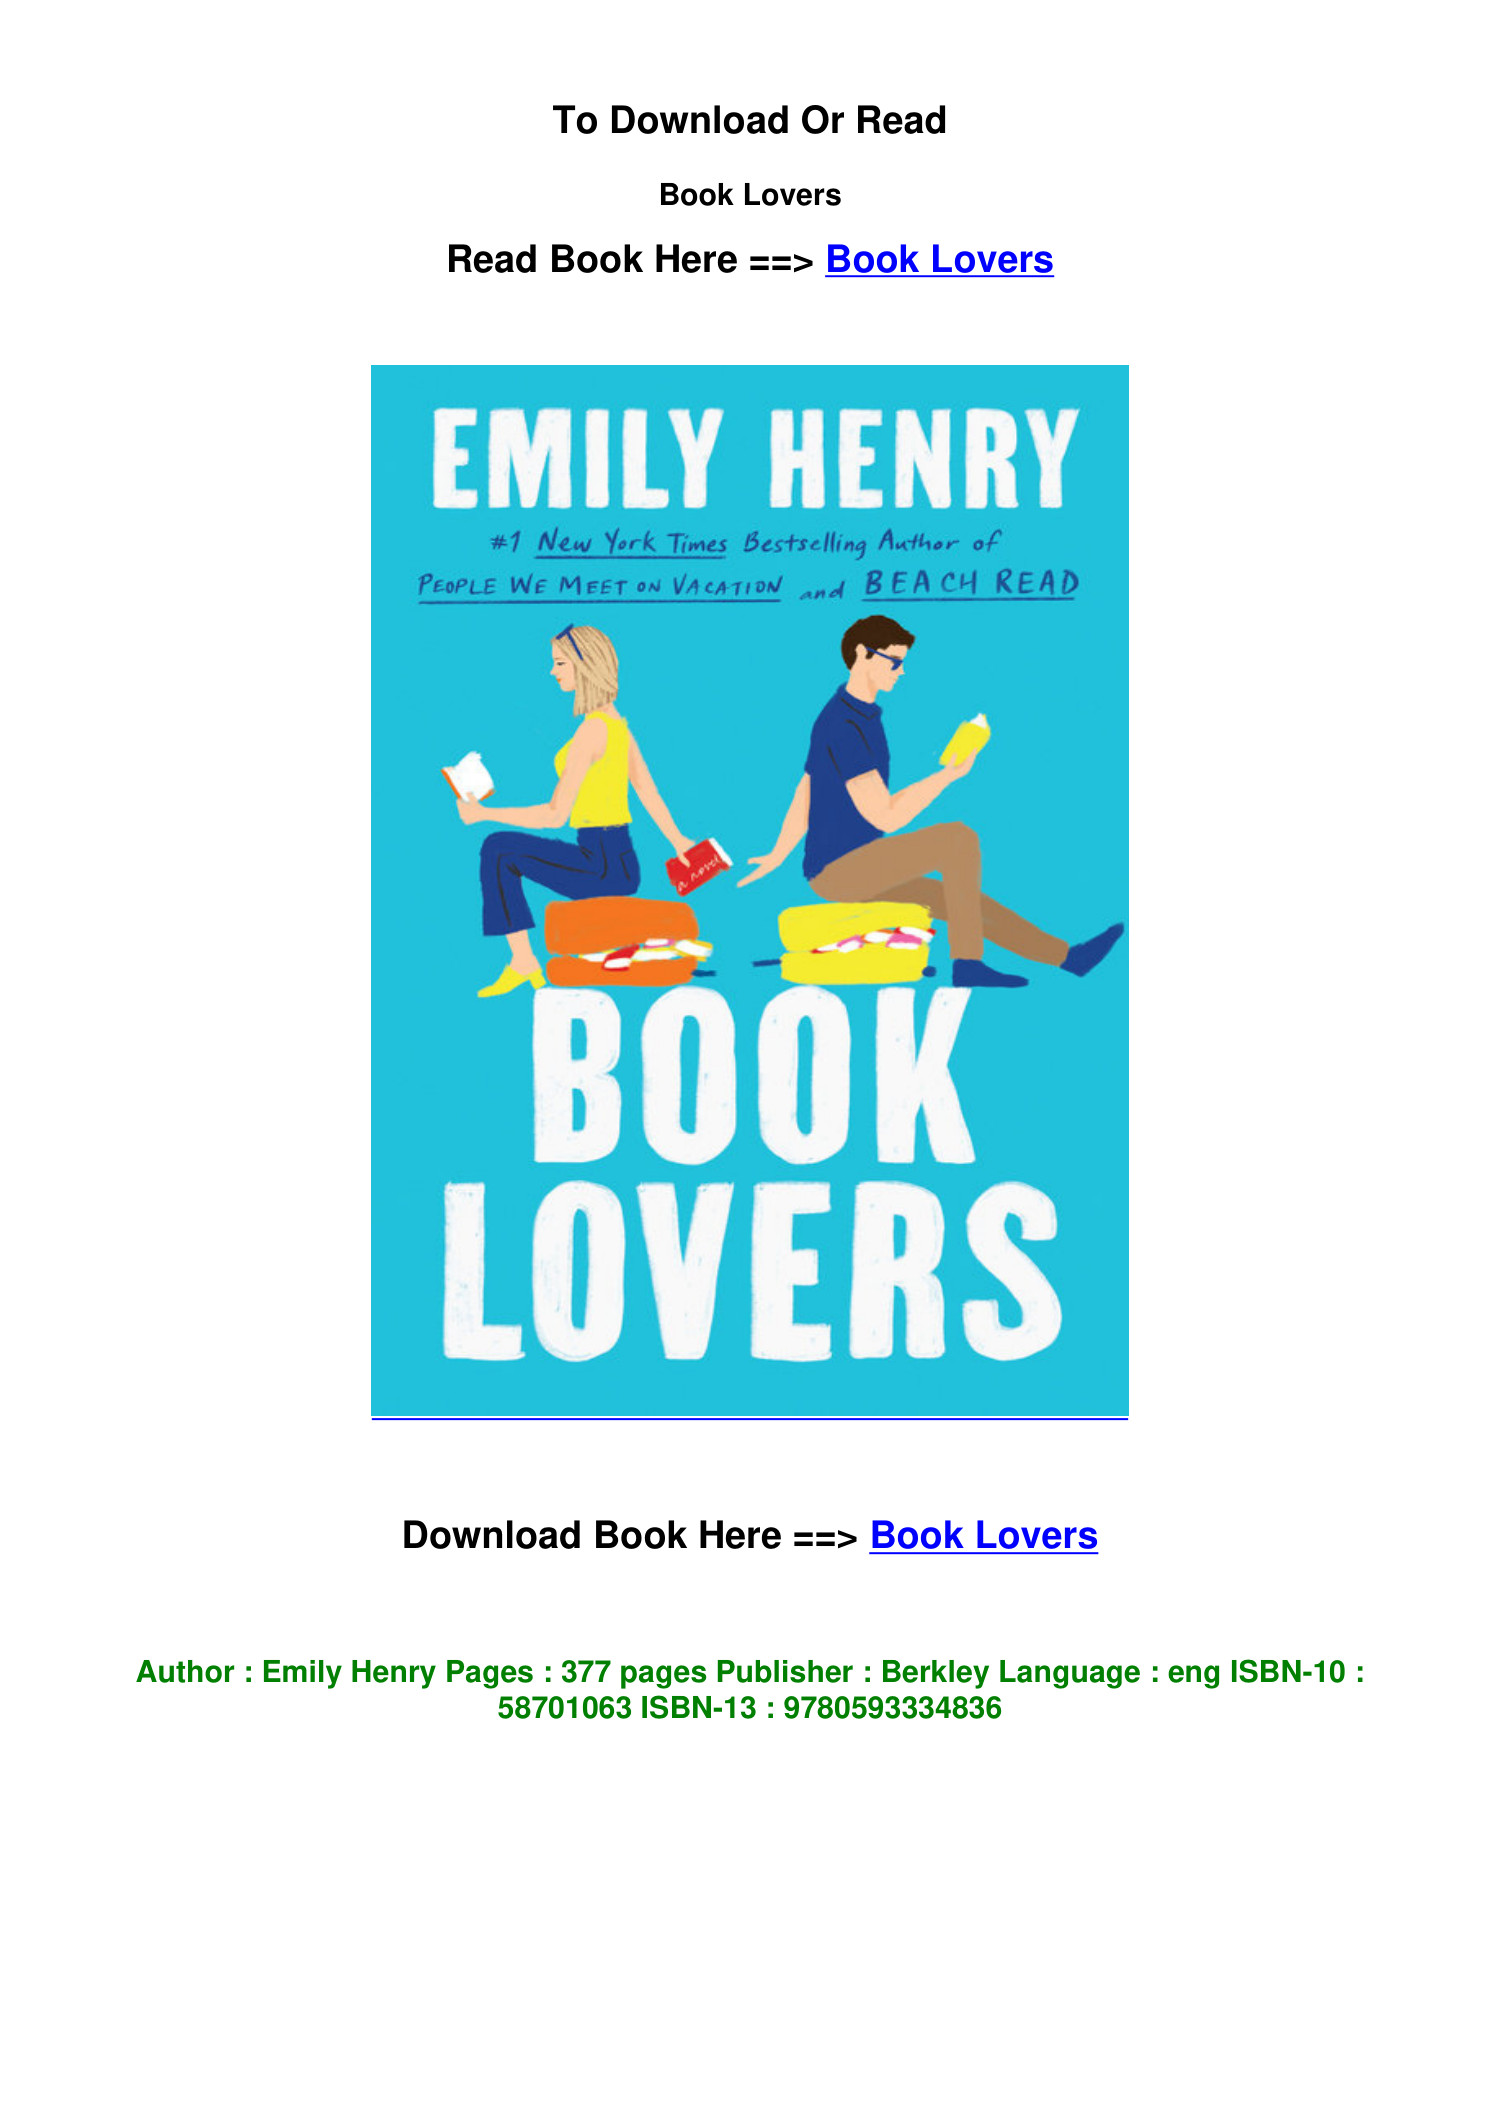 Download PDF Book Lovers by Emily Henry.pdf